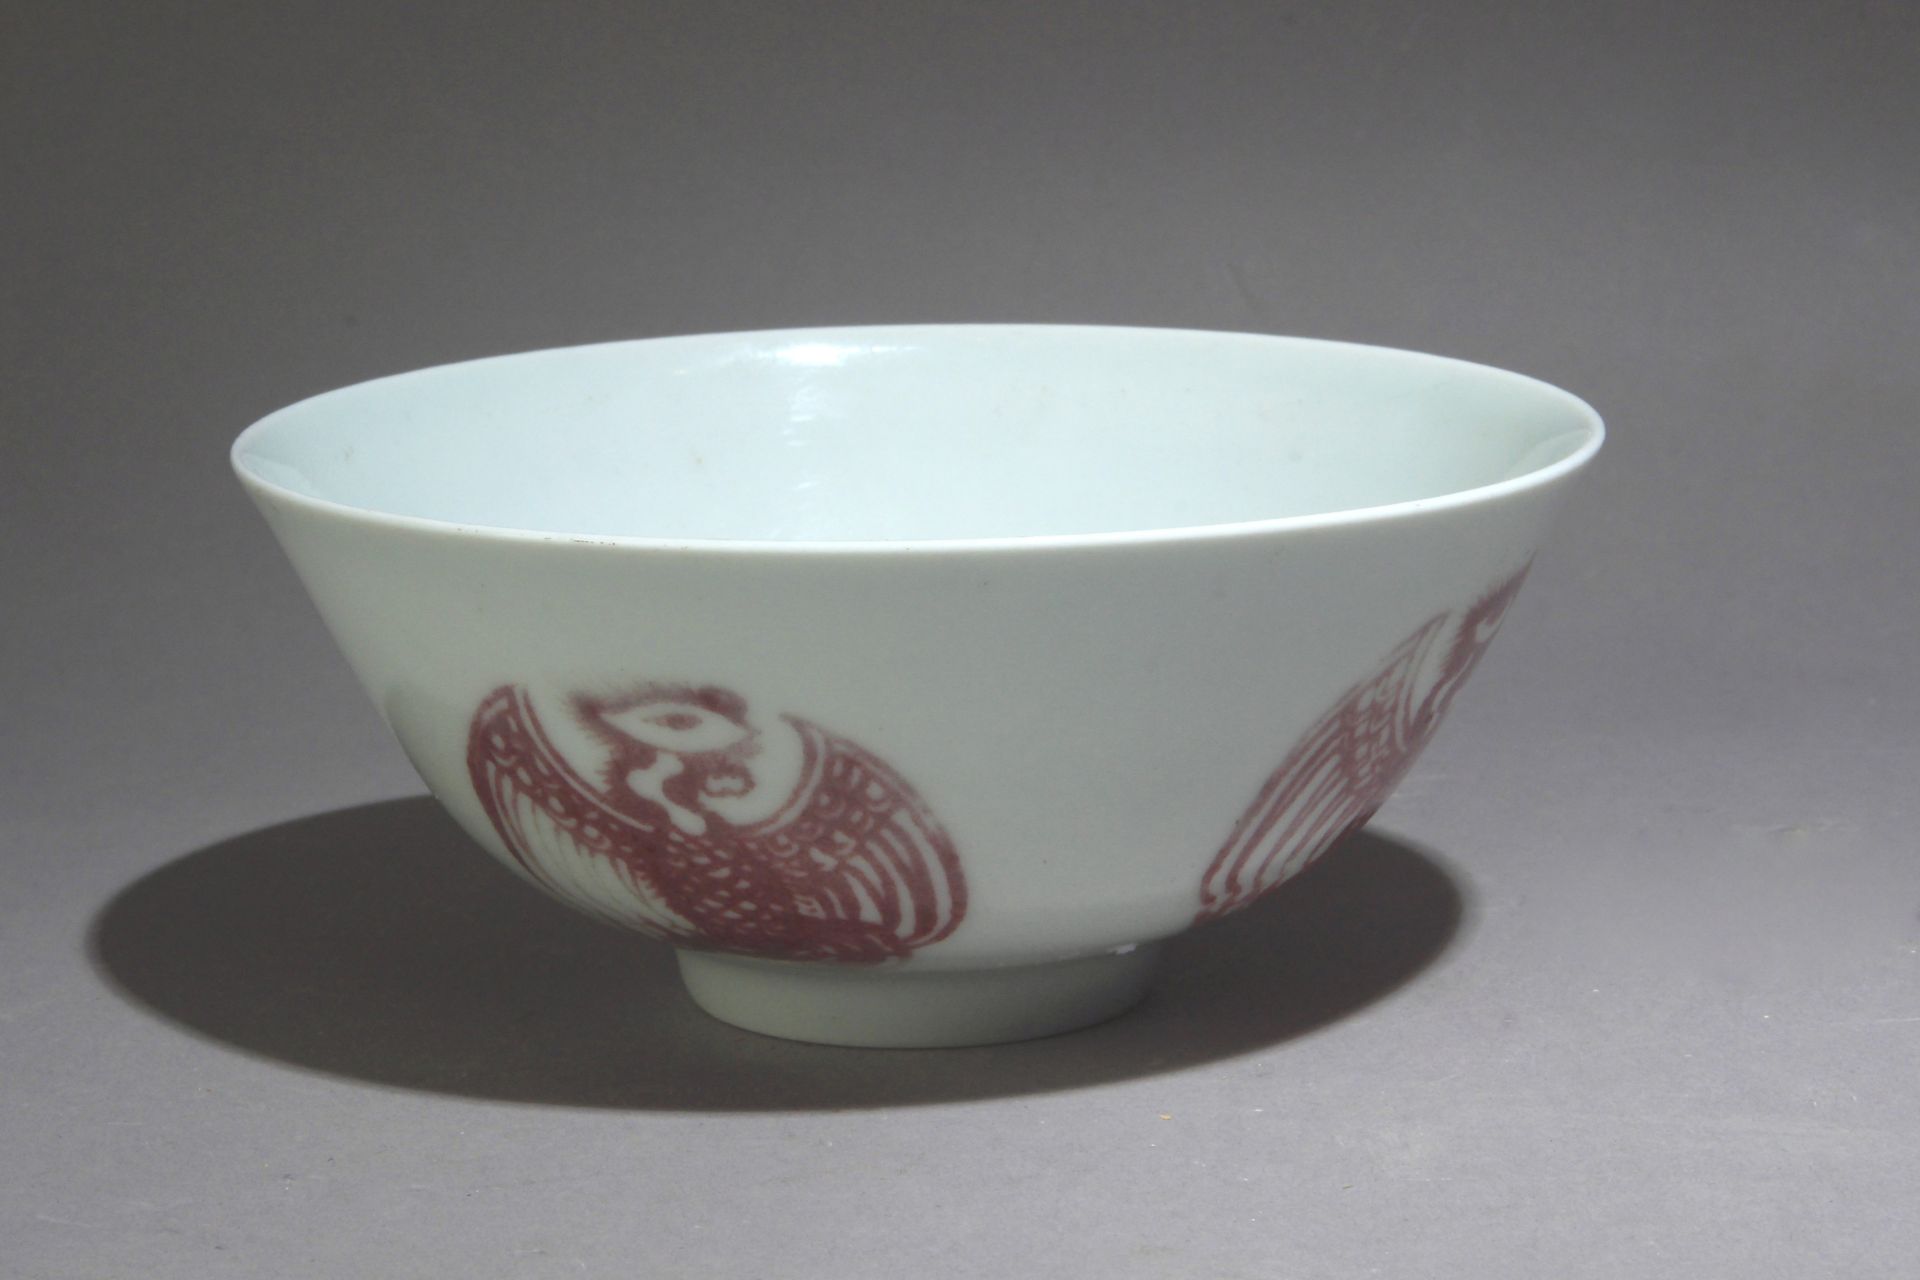 A 20th century Chinese porcelain bowl